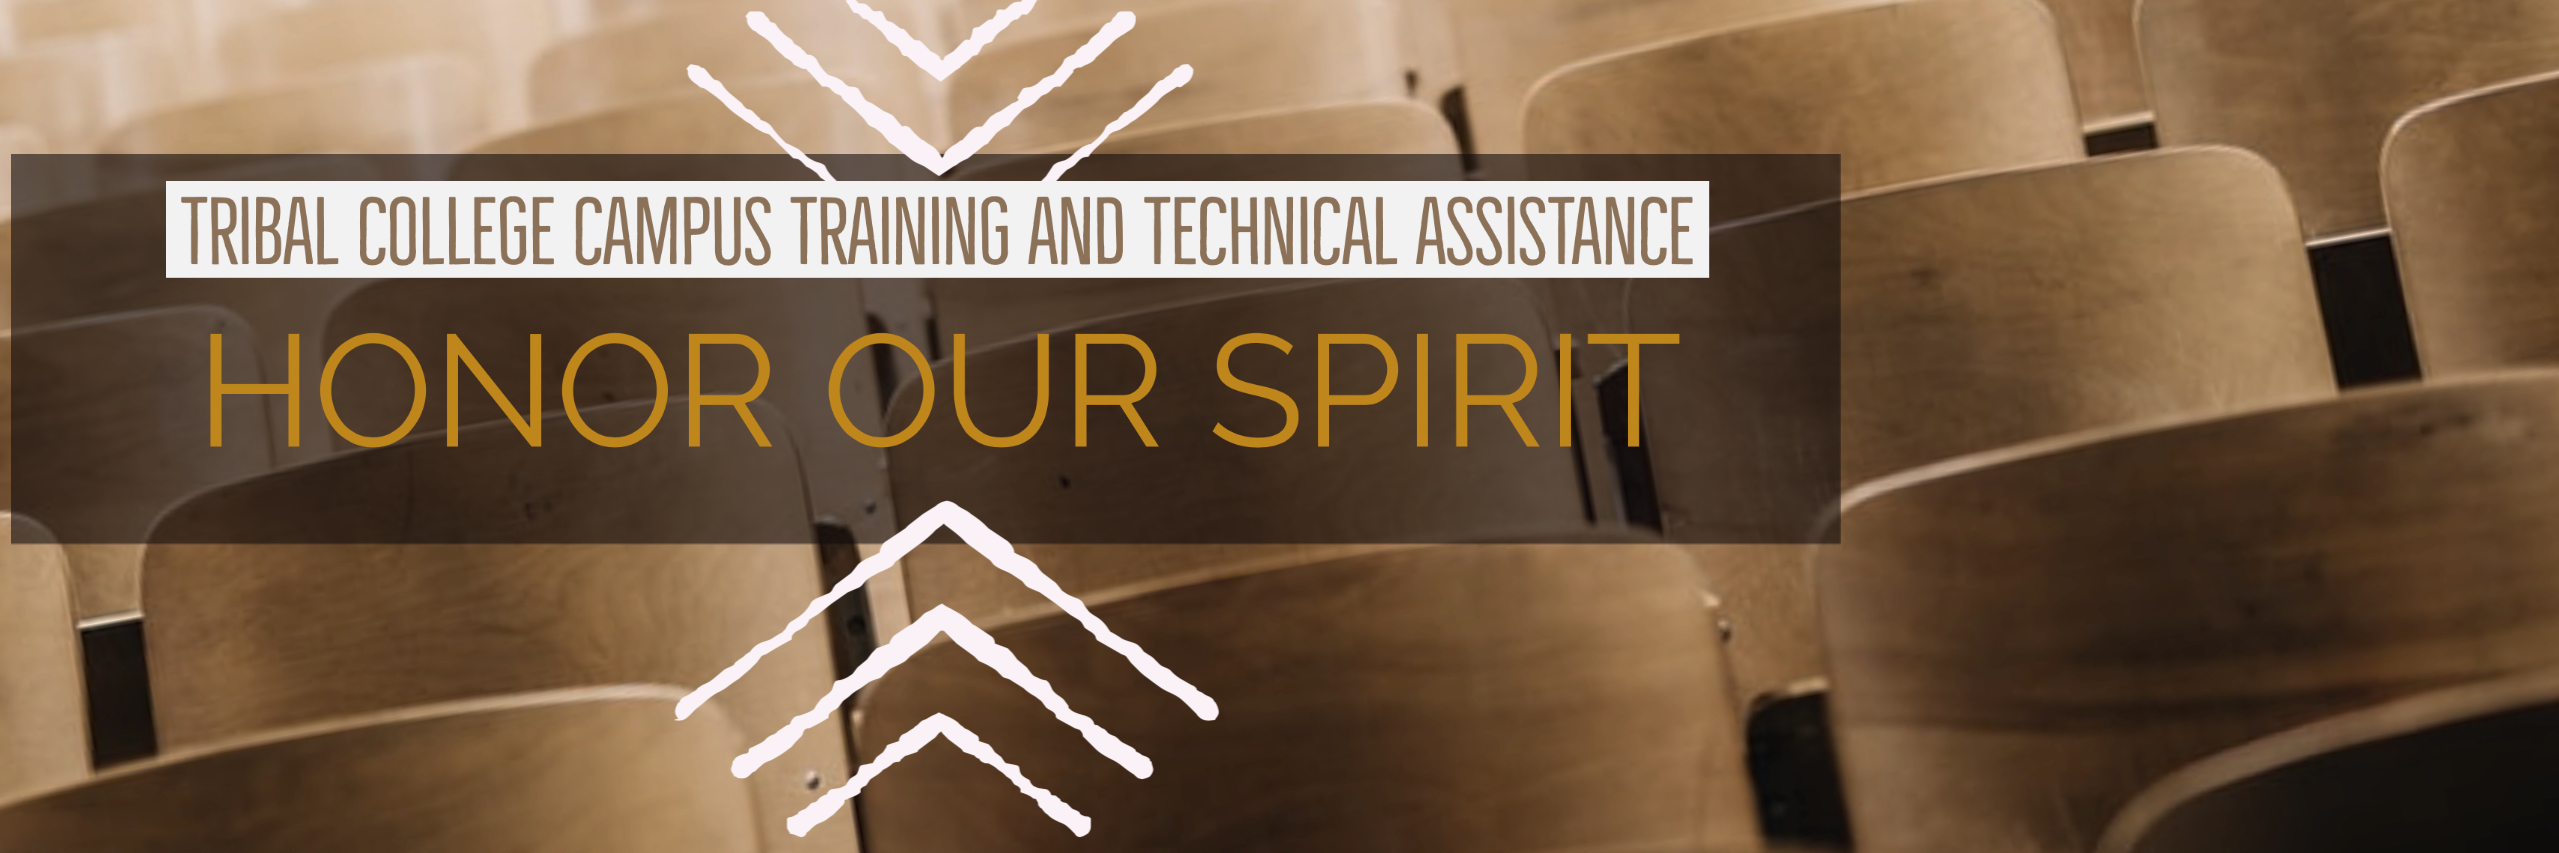 image of classroom desks, text "Tribal College Training and Technical Assistance, Honoring Our Spirit"